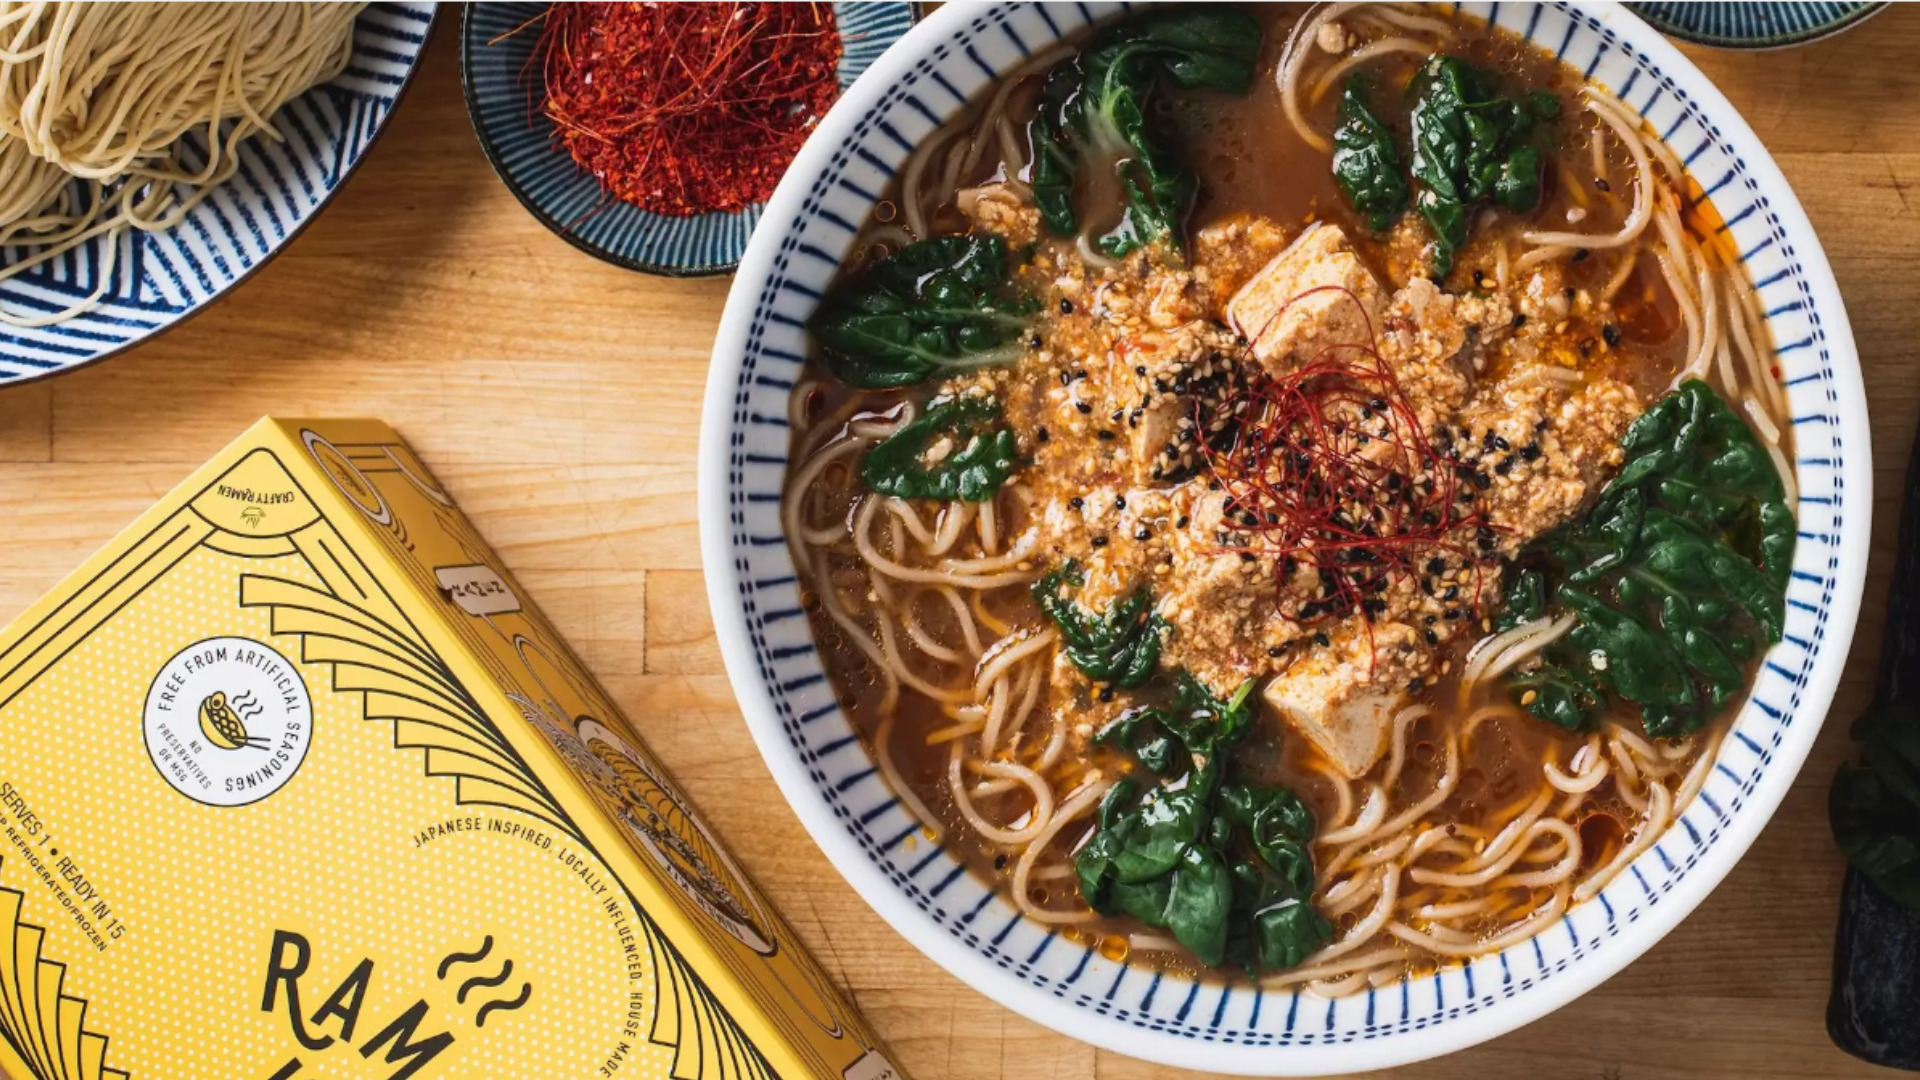 Expert tips for crafting the perfect bowl of ramen